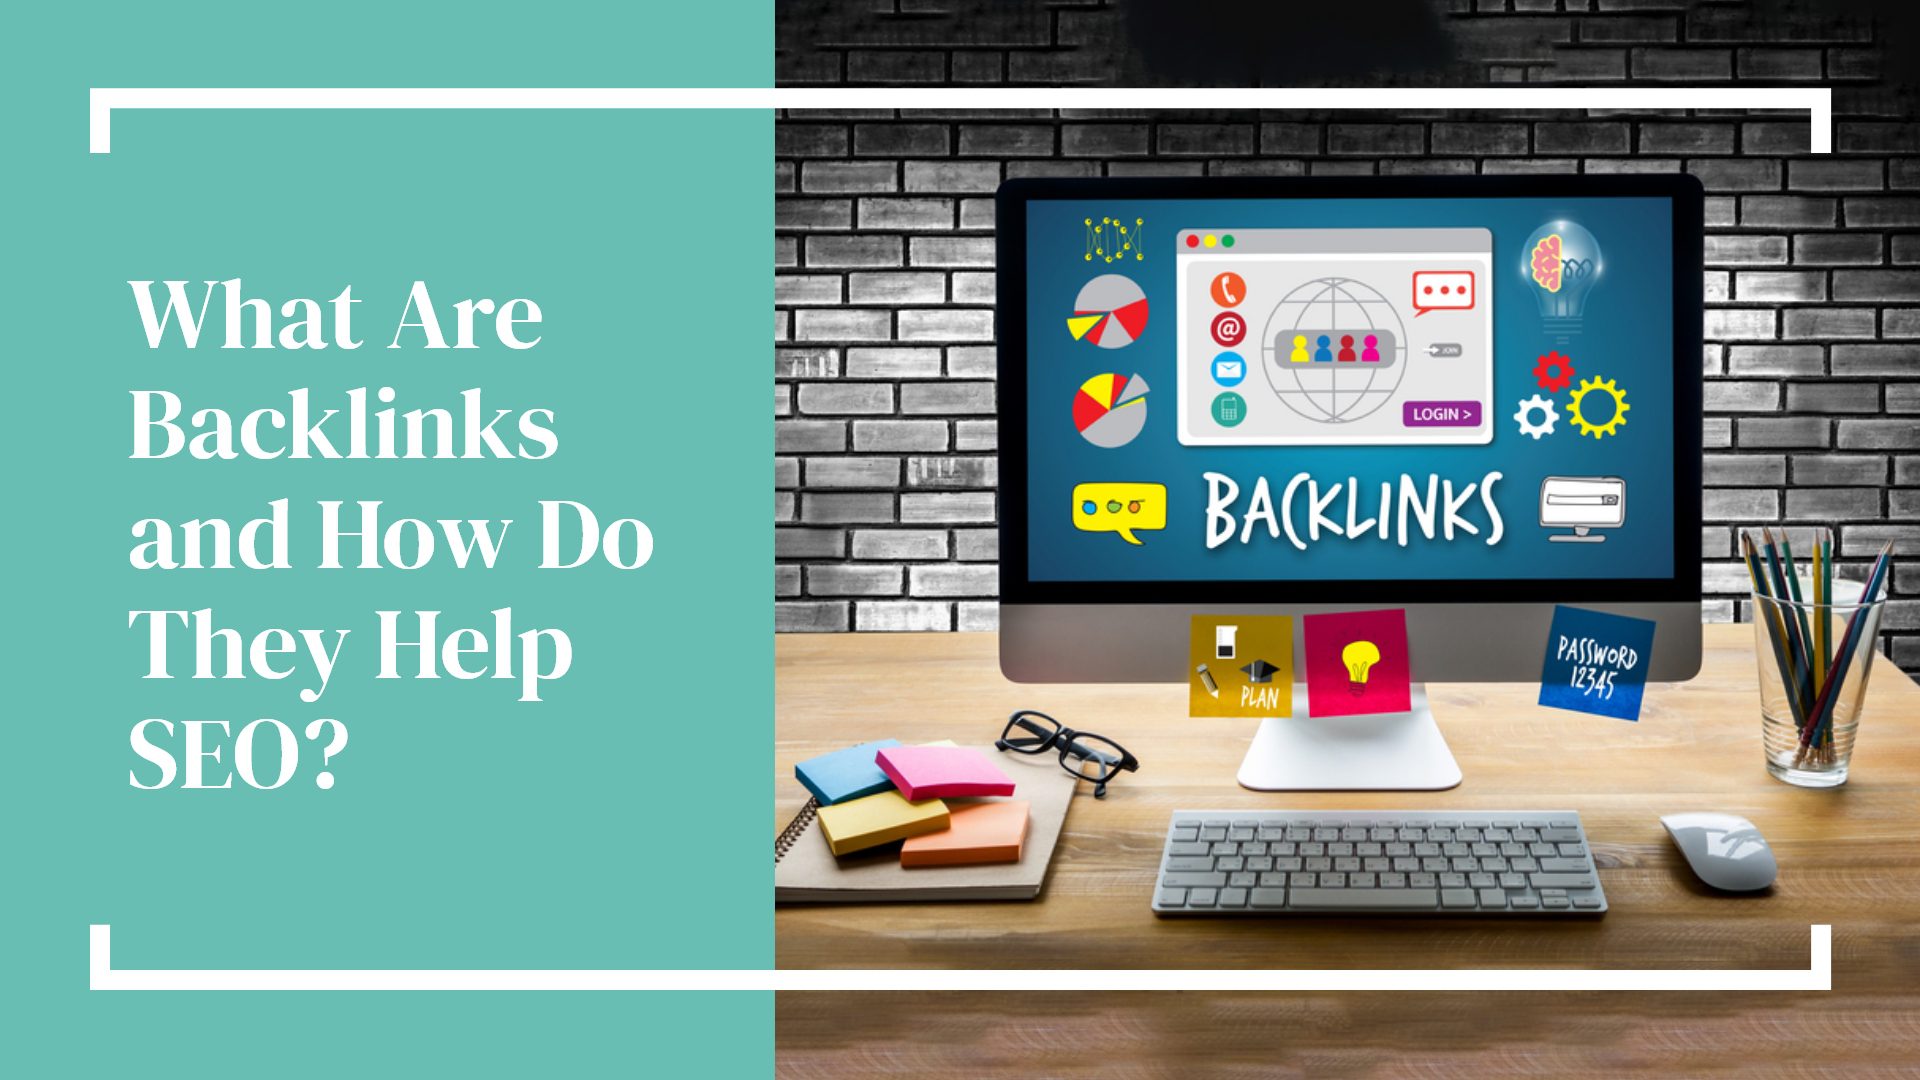 What Are Backlinks and How Do They Help SEO?